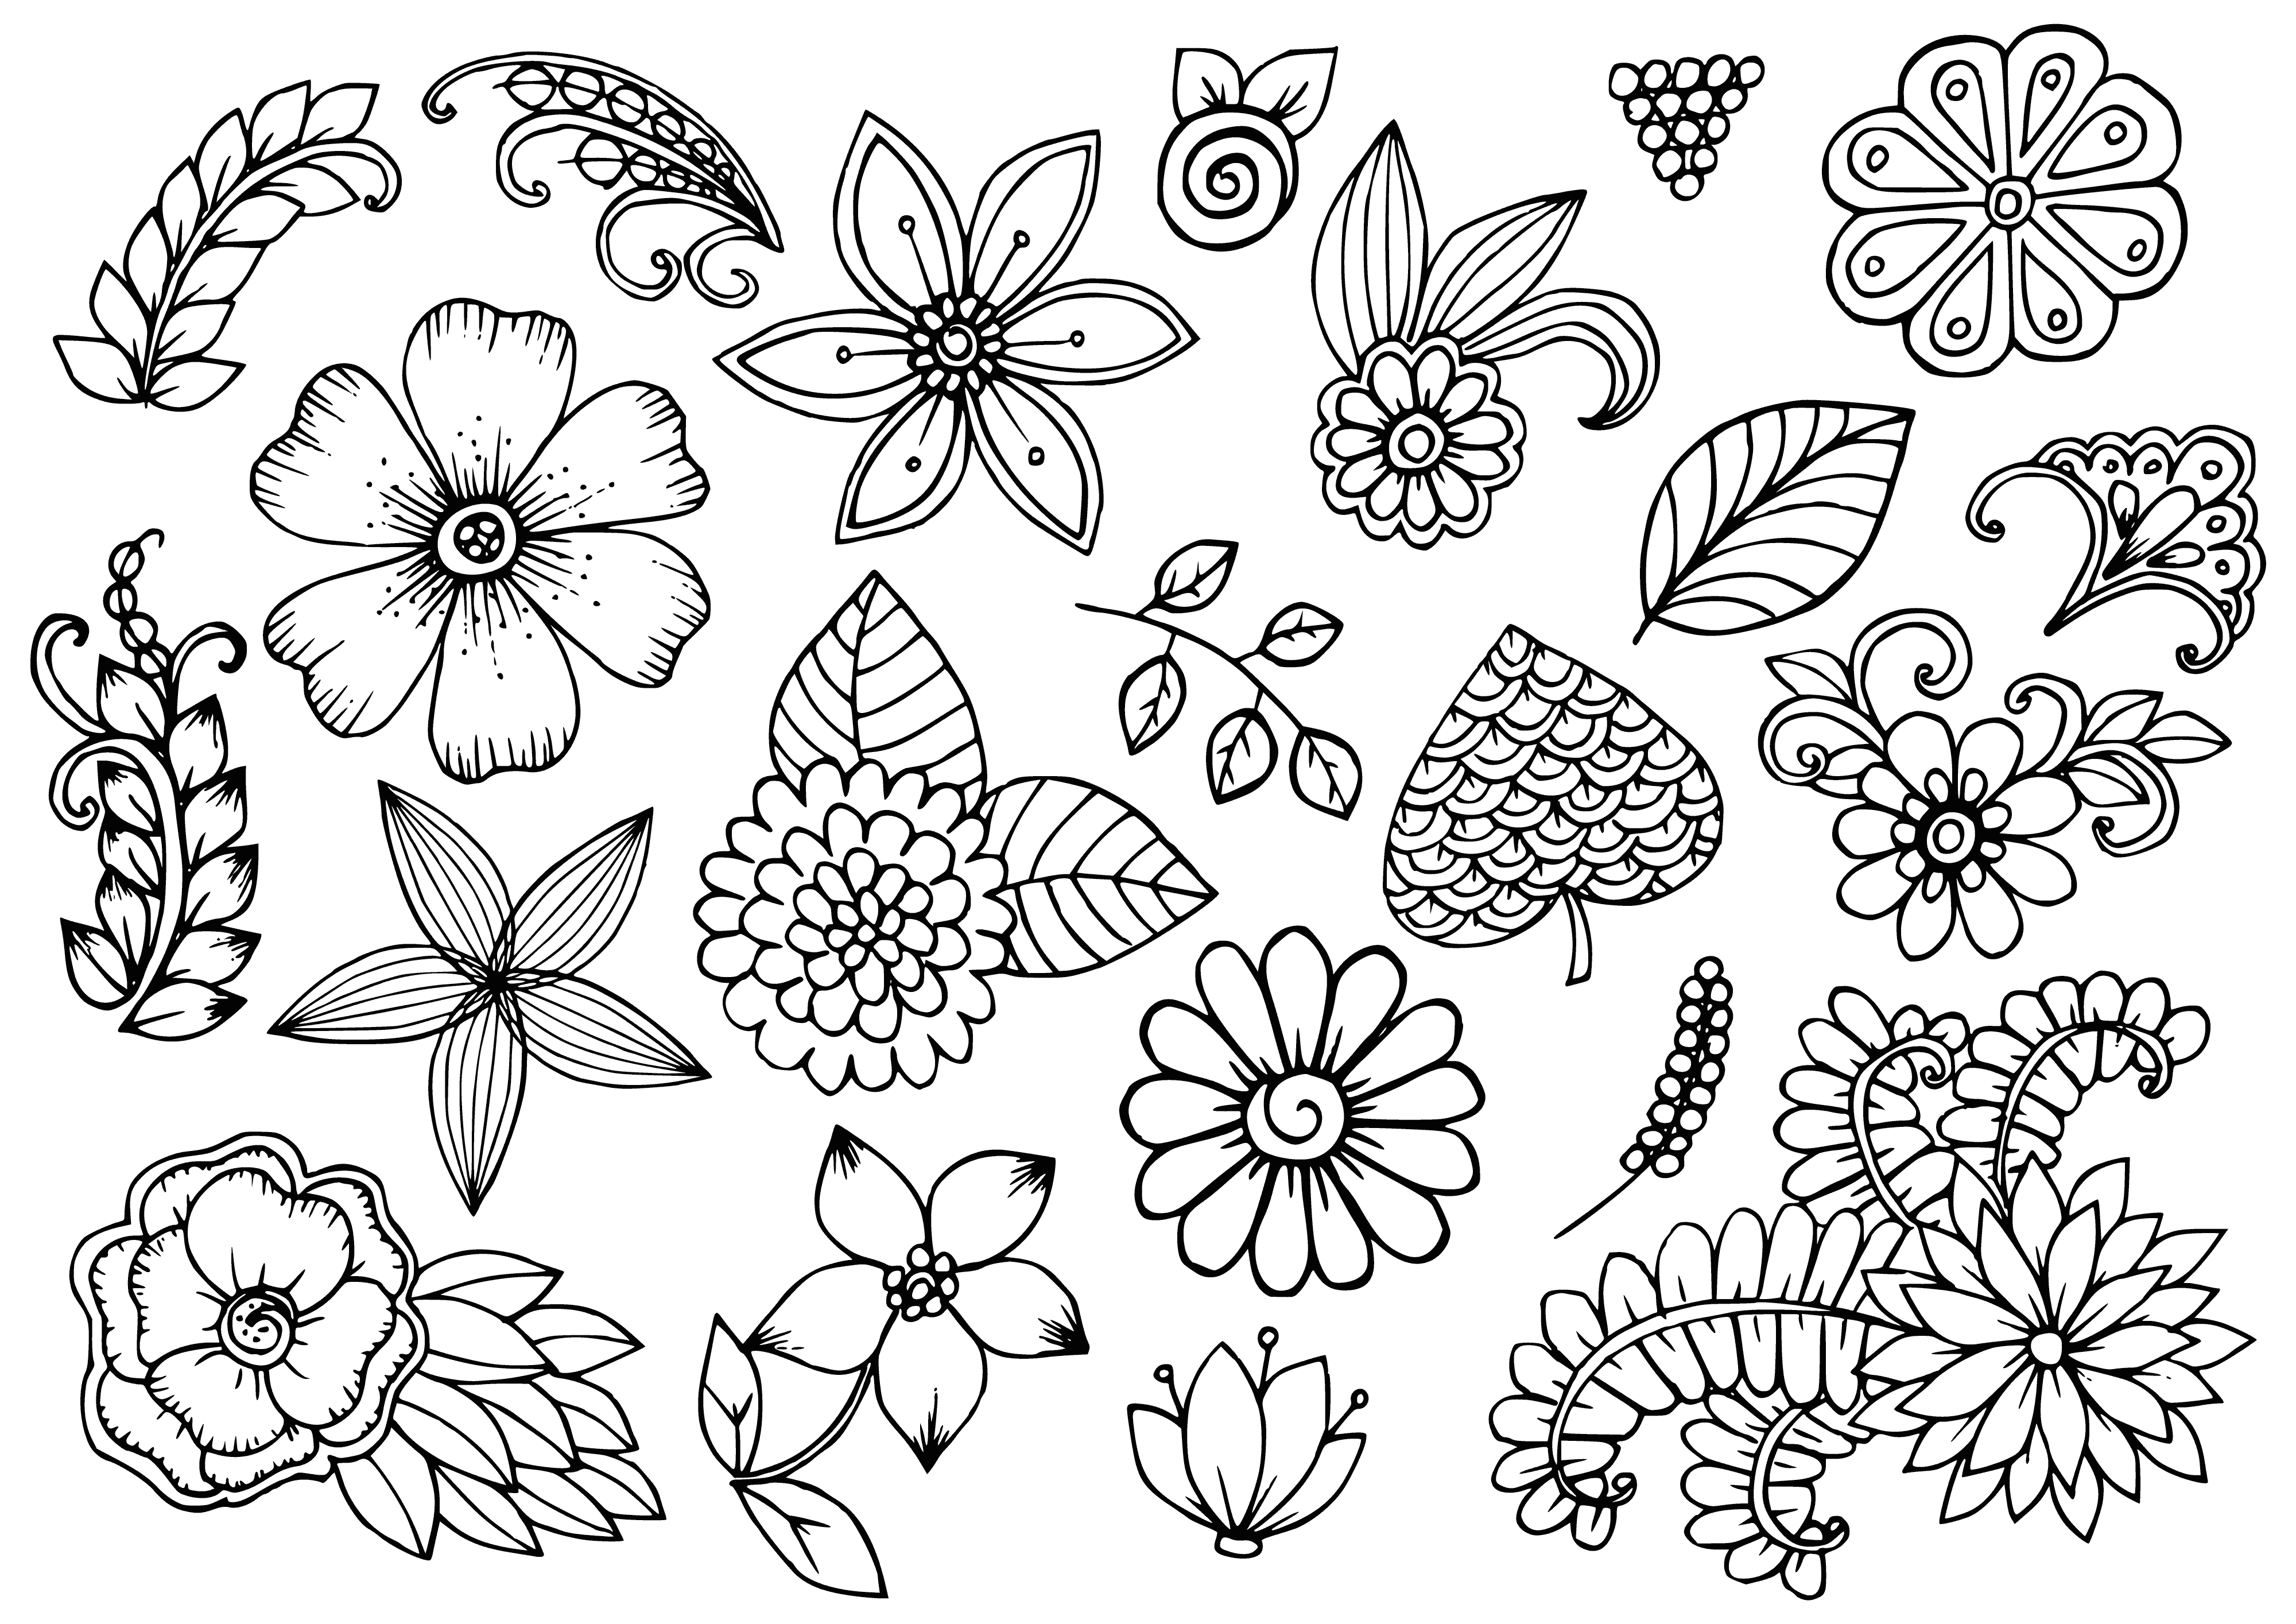 coloring page: Pretty coloring page with a mix of roses, daisies, tulips, and lilies in pink, yellow, purple, red, and orange.